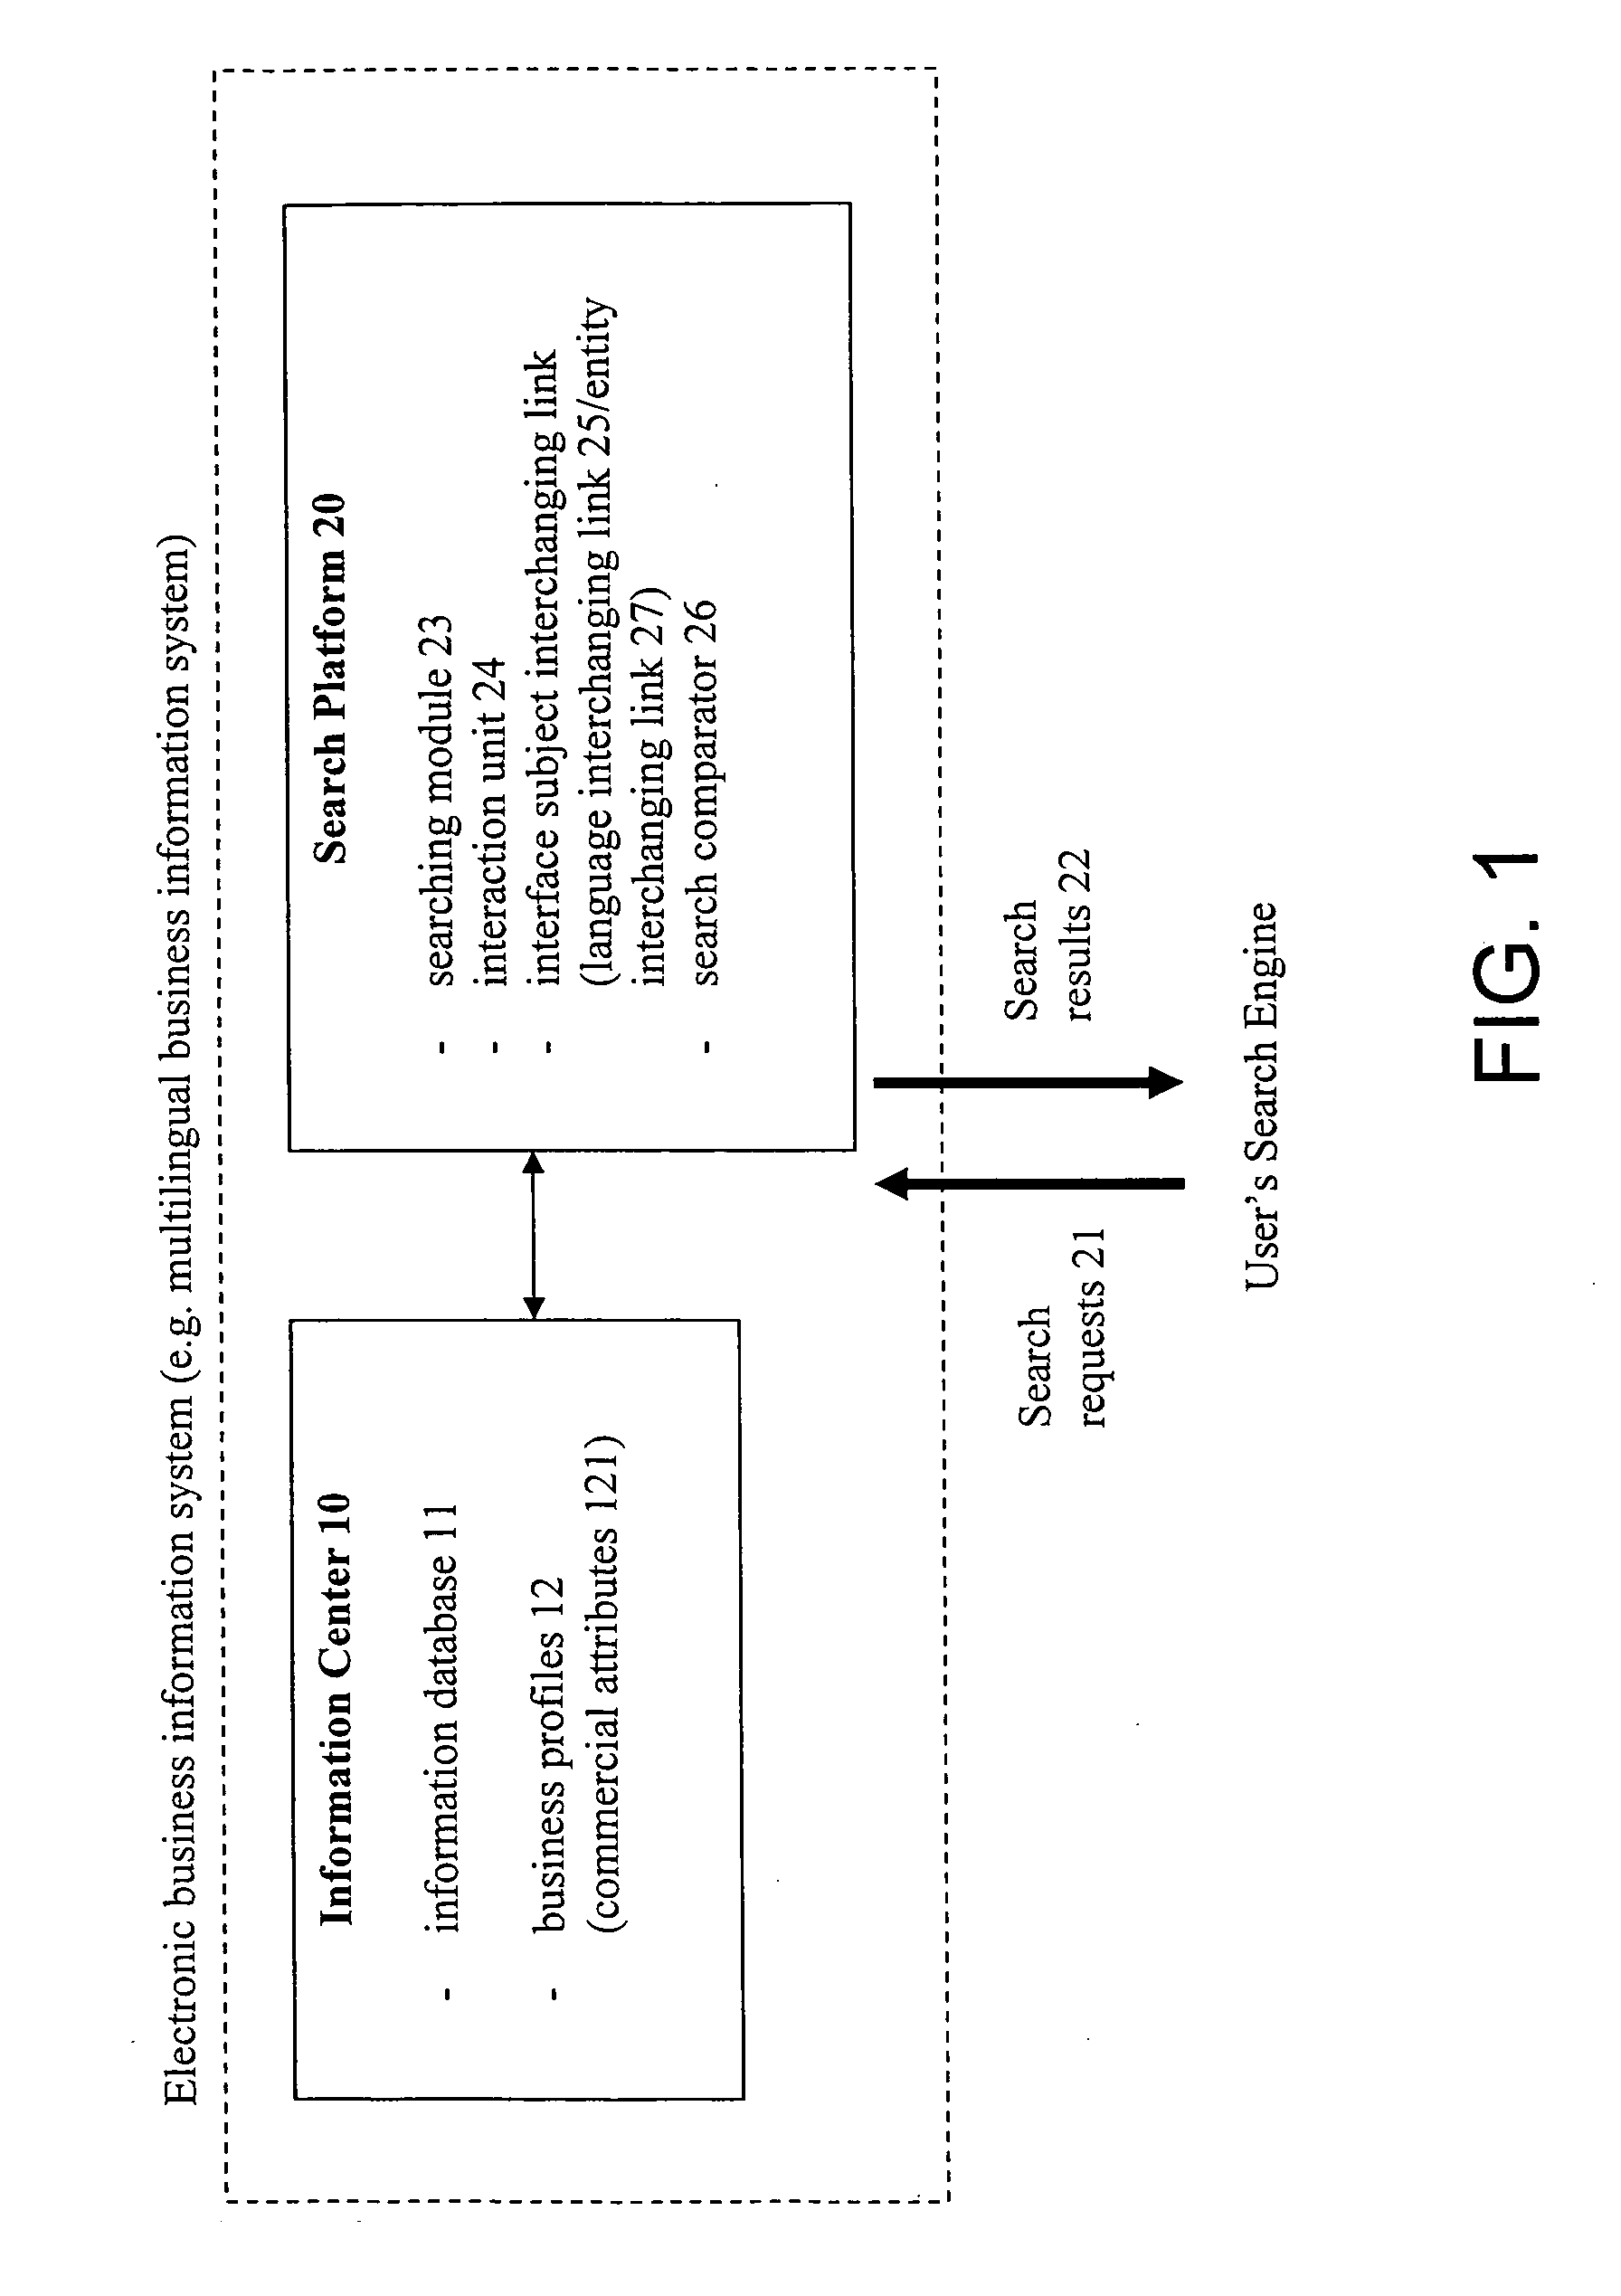 Electronic business information system